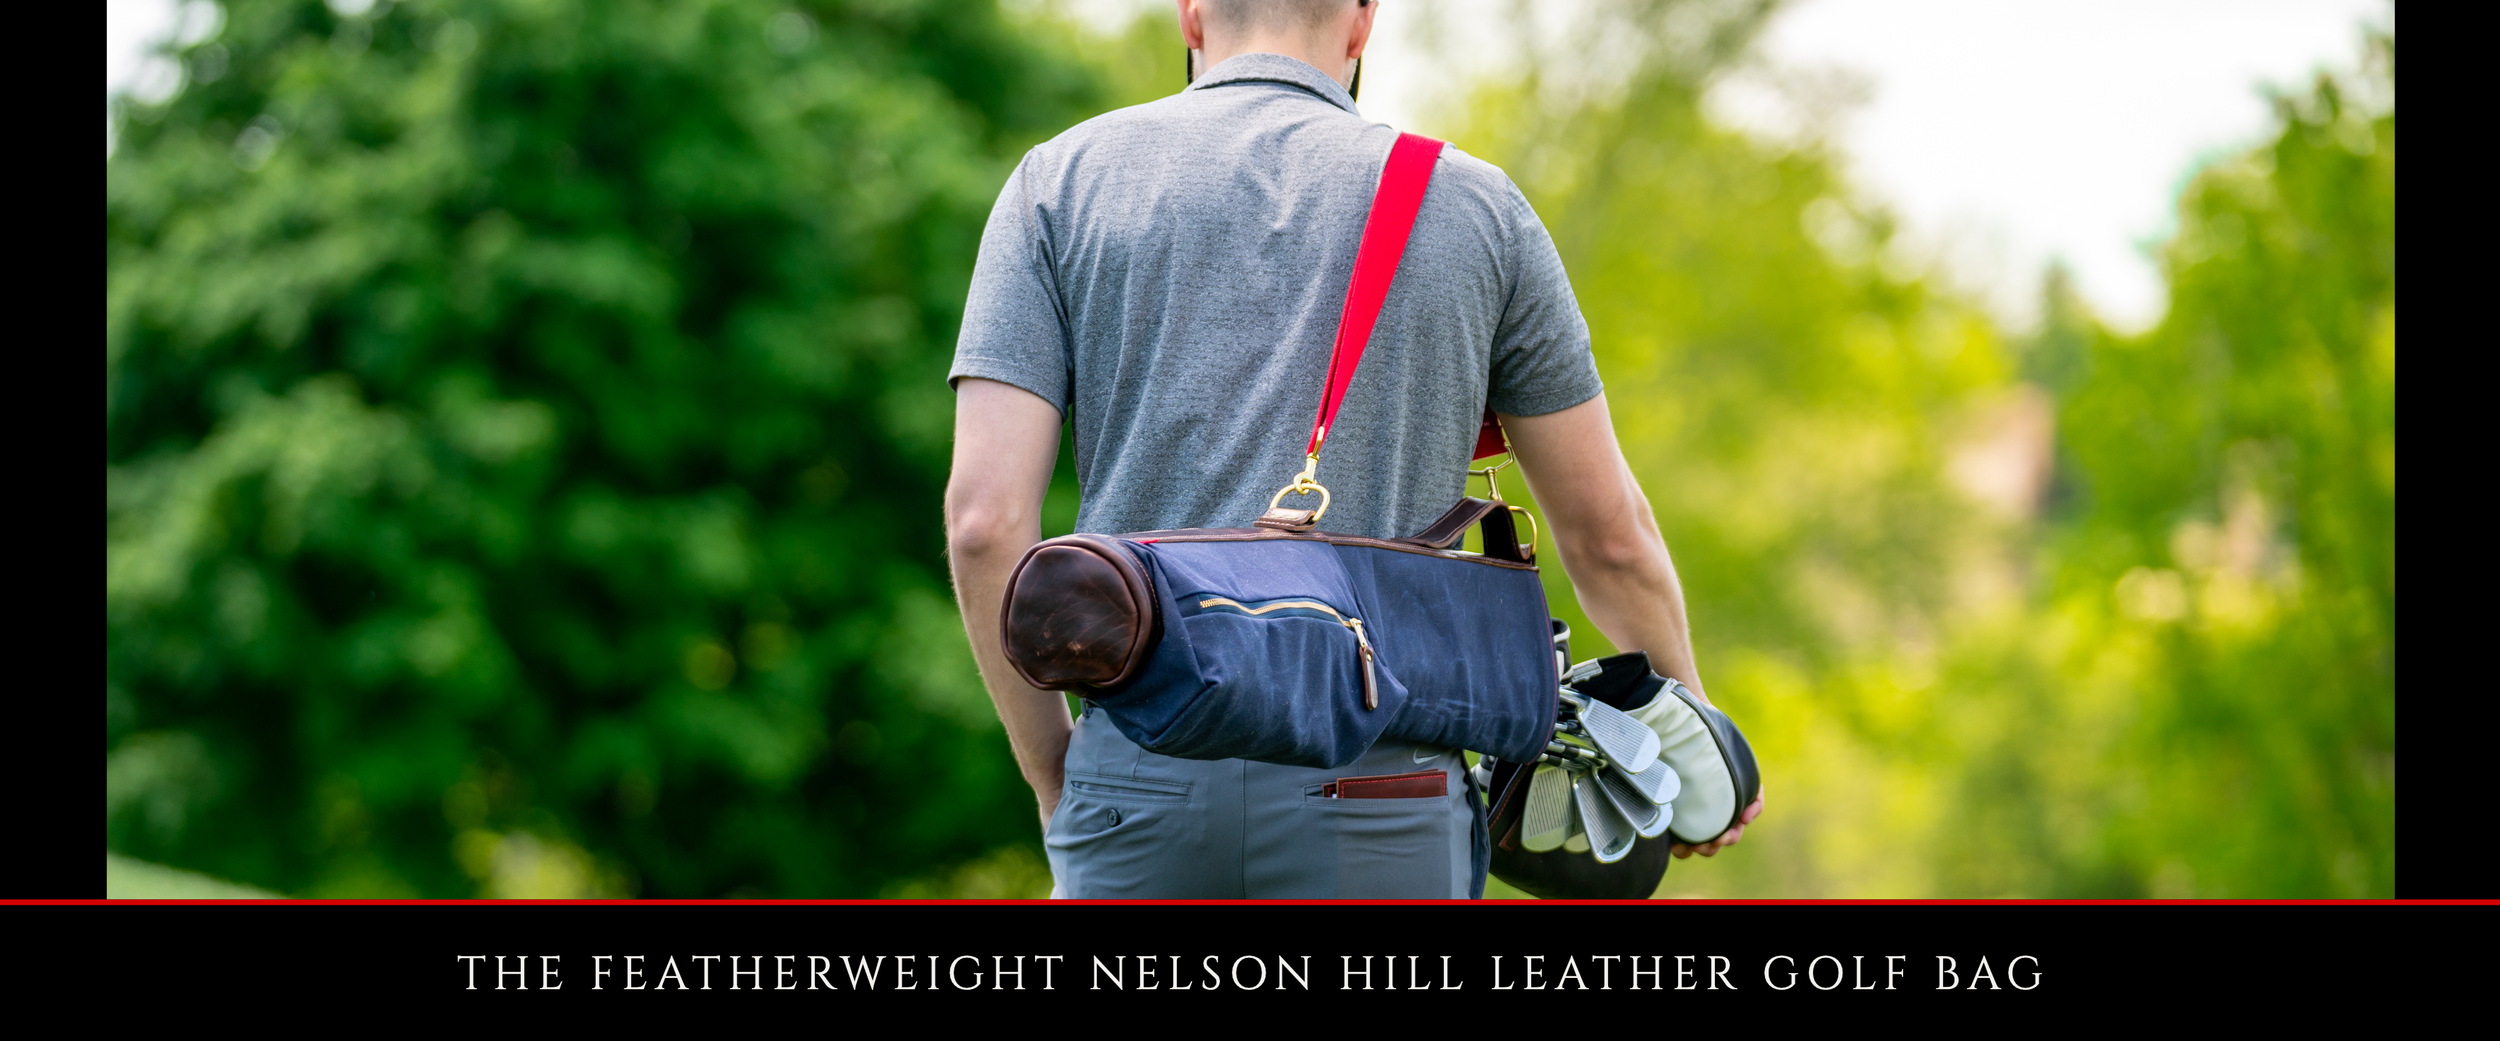 The Featherweight Nelson Hill Leather Golf Bag — Nelson Hill